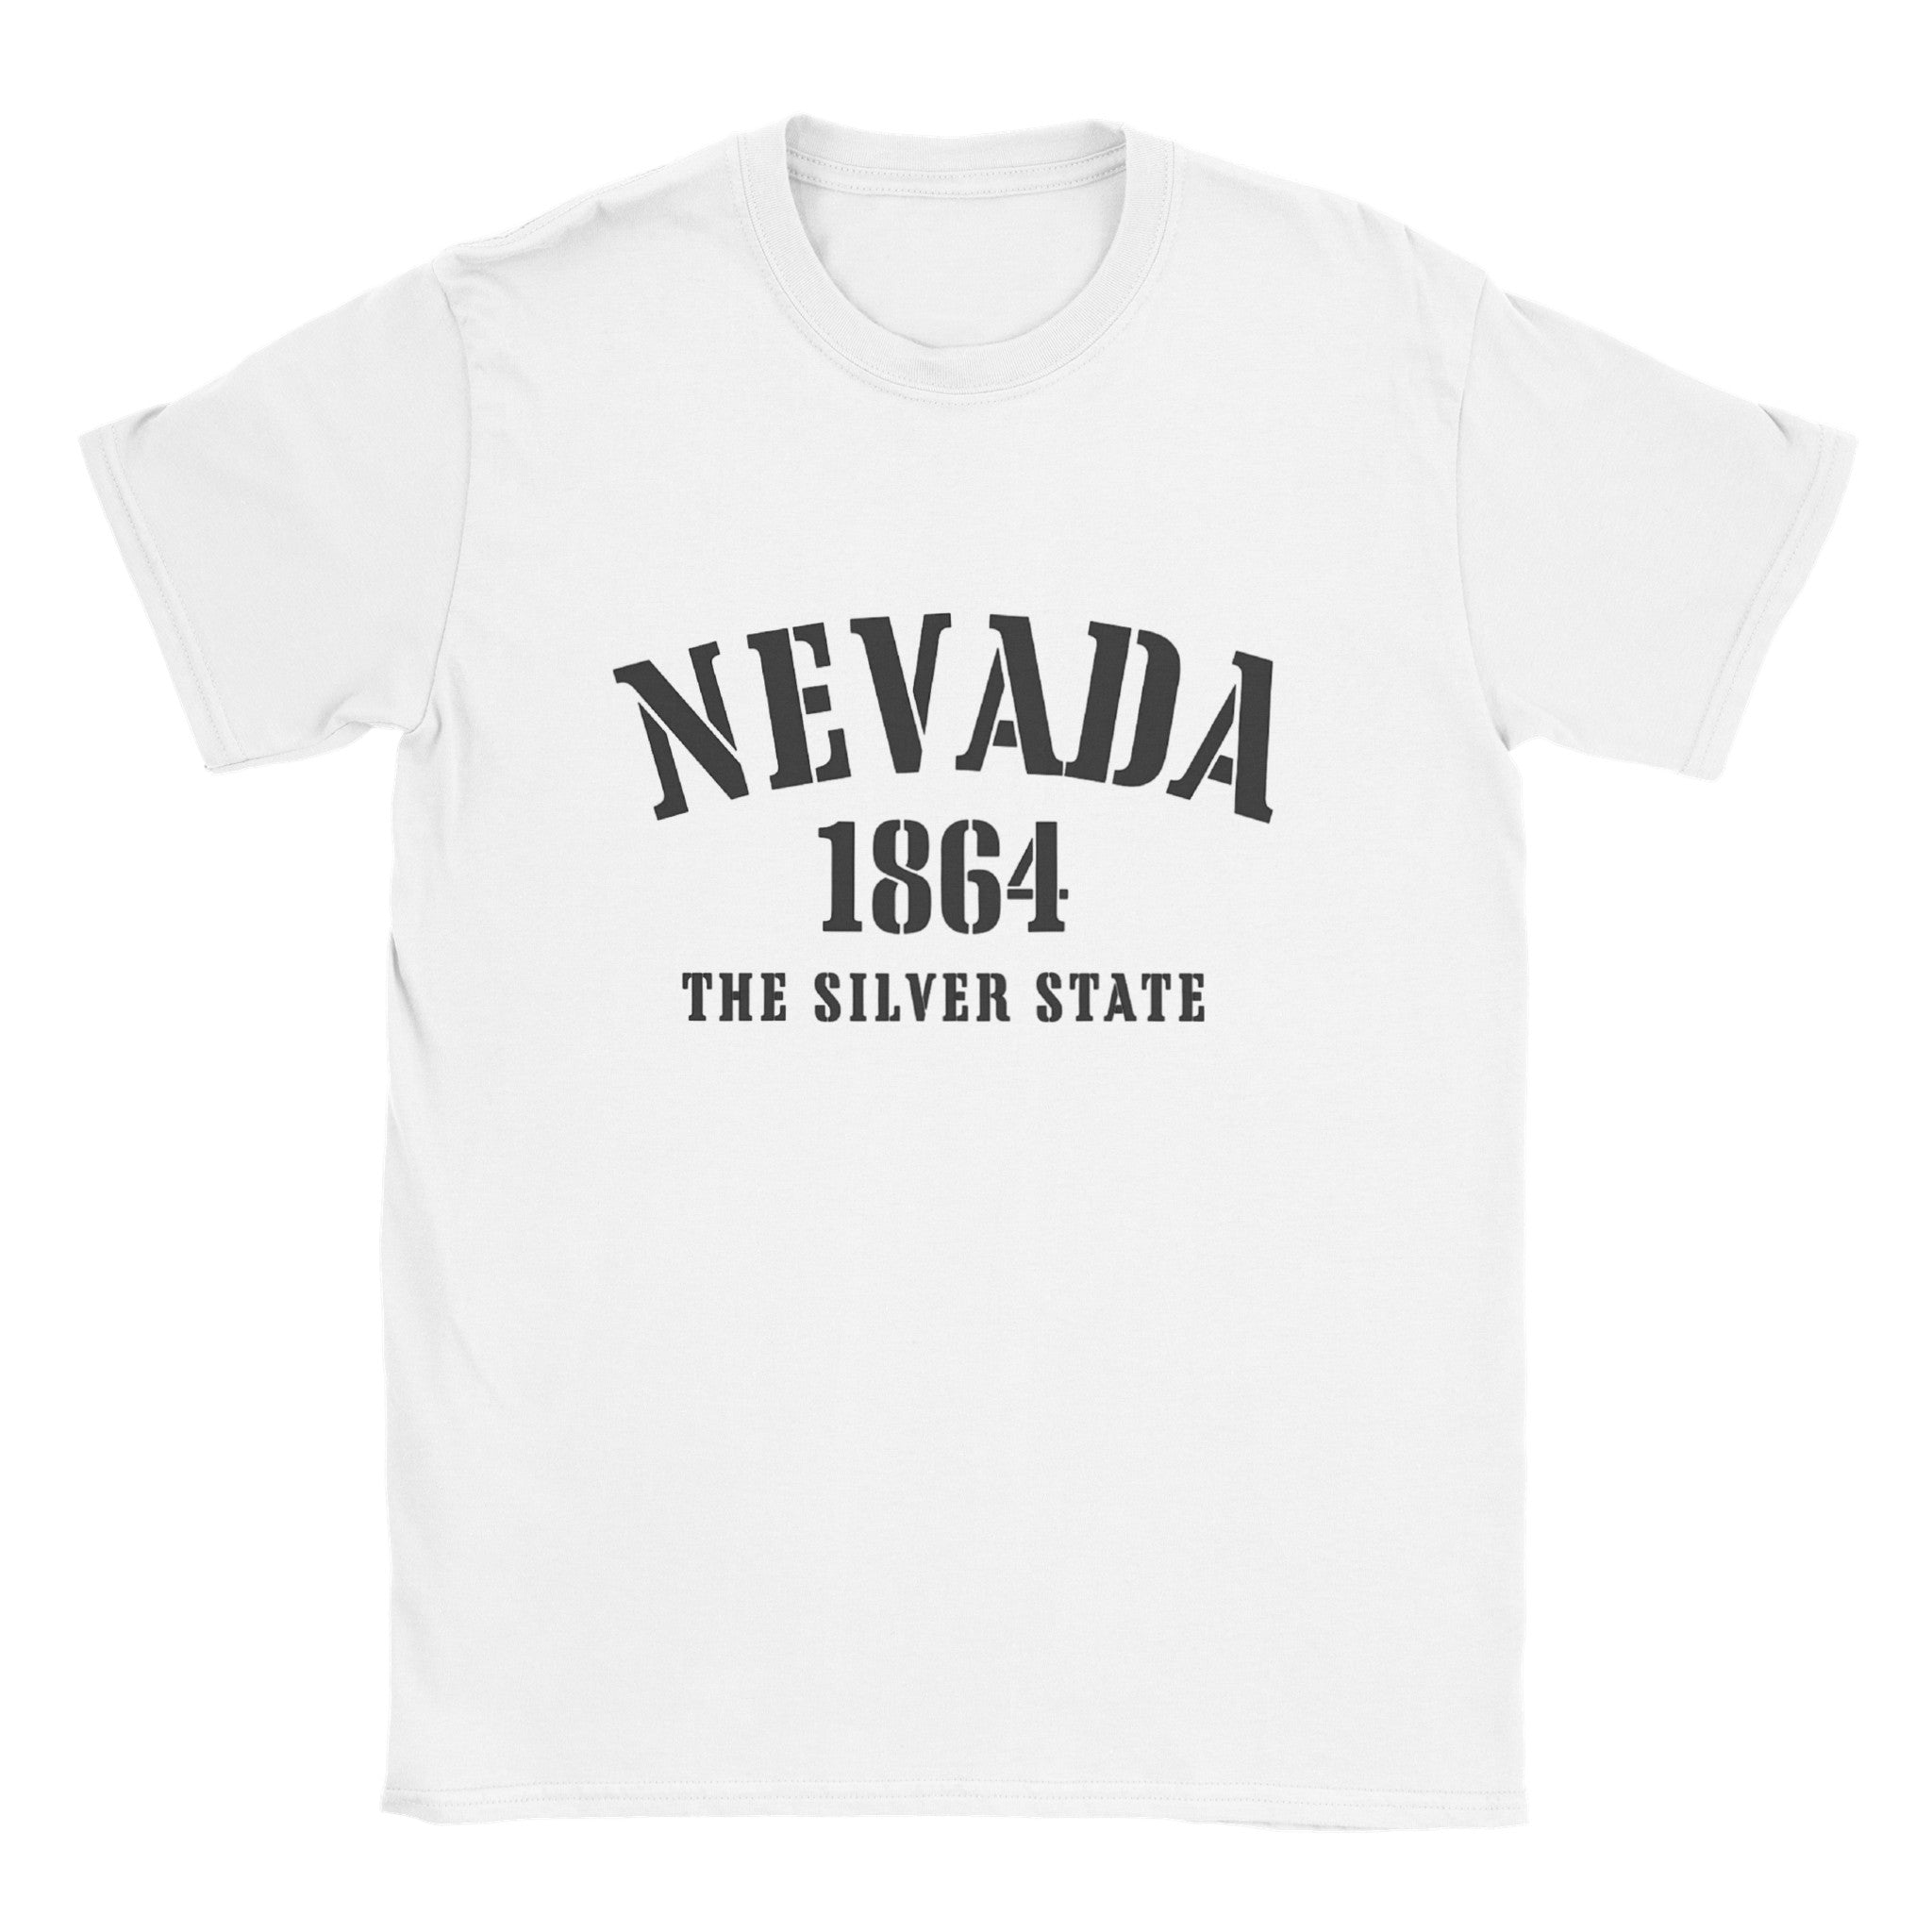 Nevada- Classic Unisex Crewneck States T-shirt - Creations by Chris and Carlos